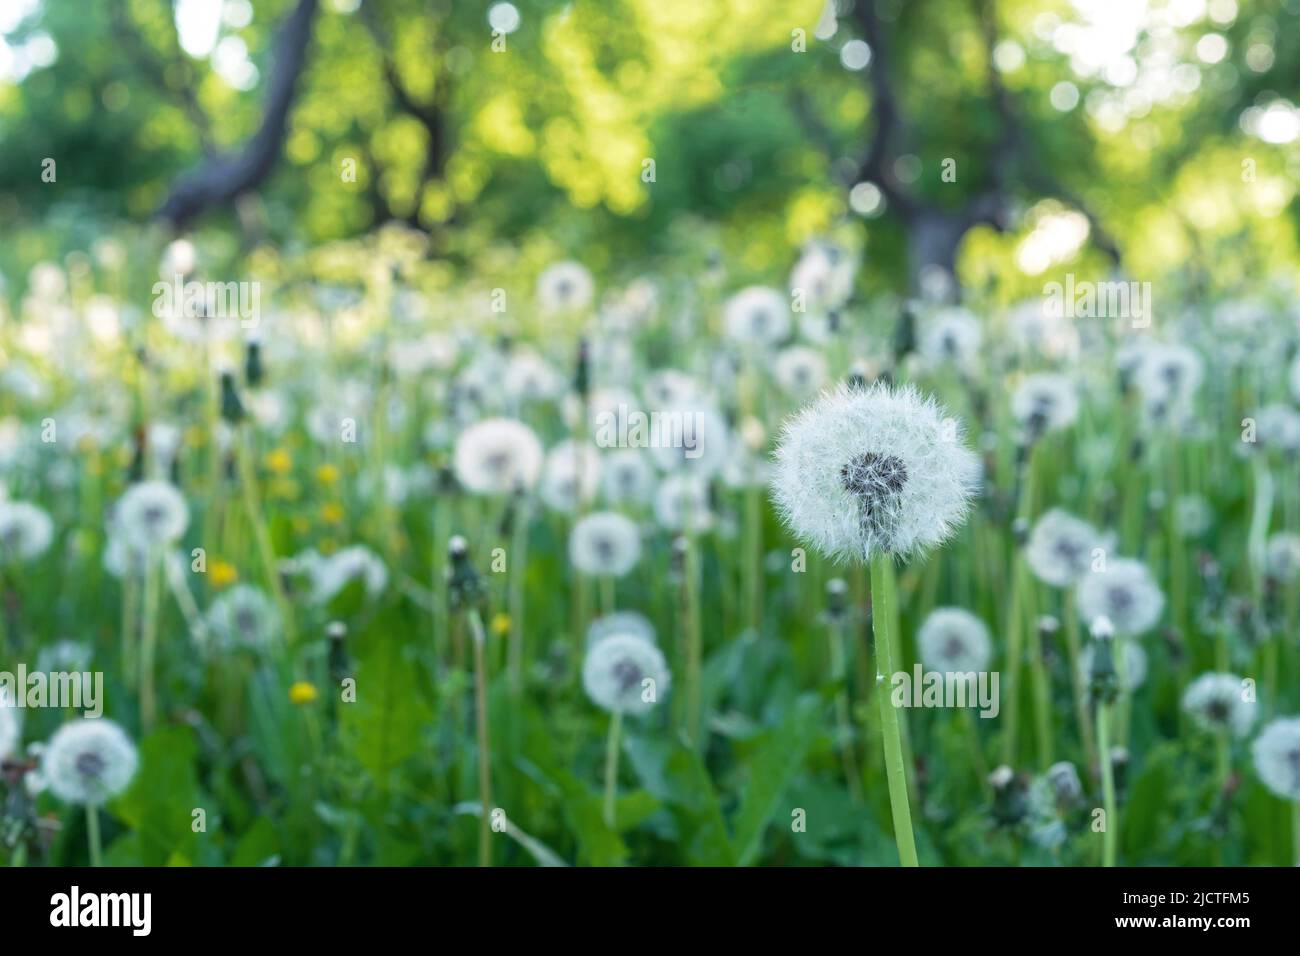 Glade with white and fluffy dandelions. Dandelion field. Stock Photo